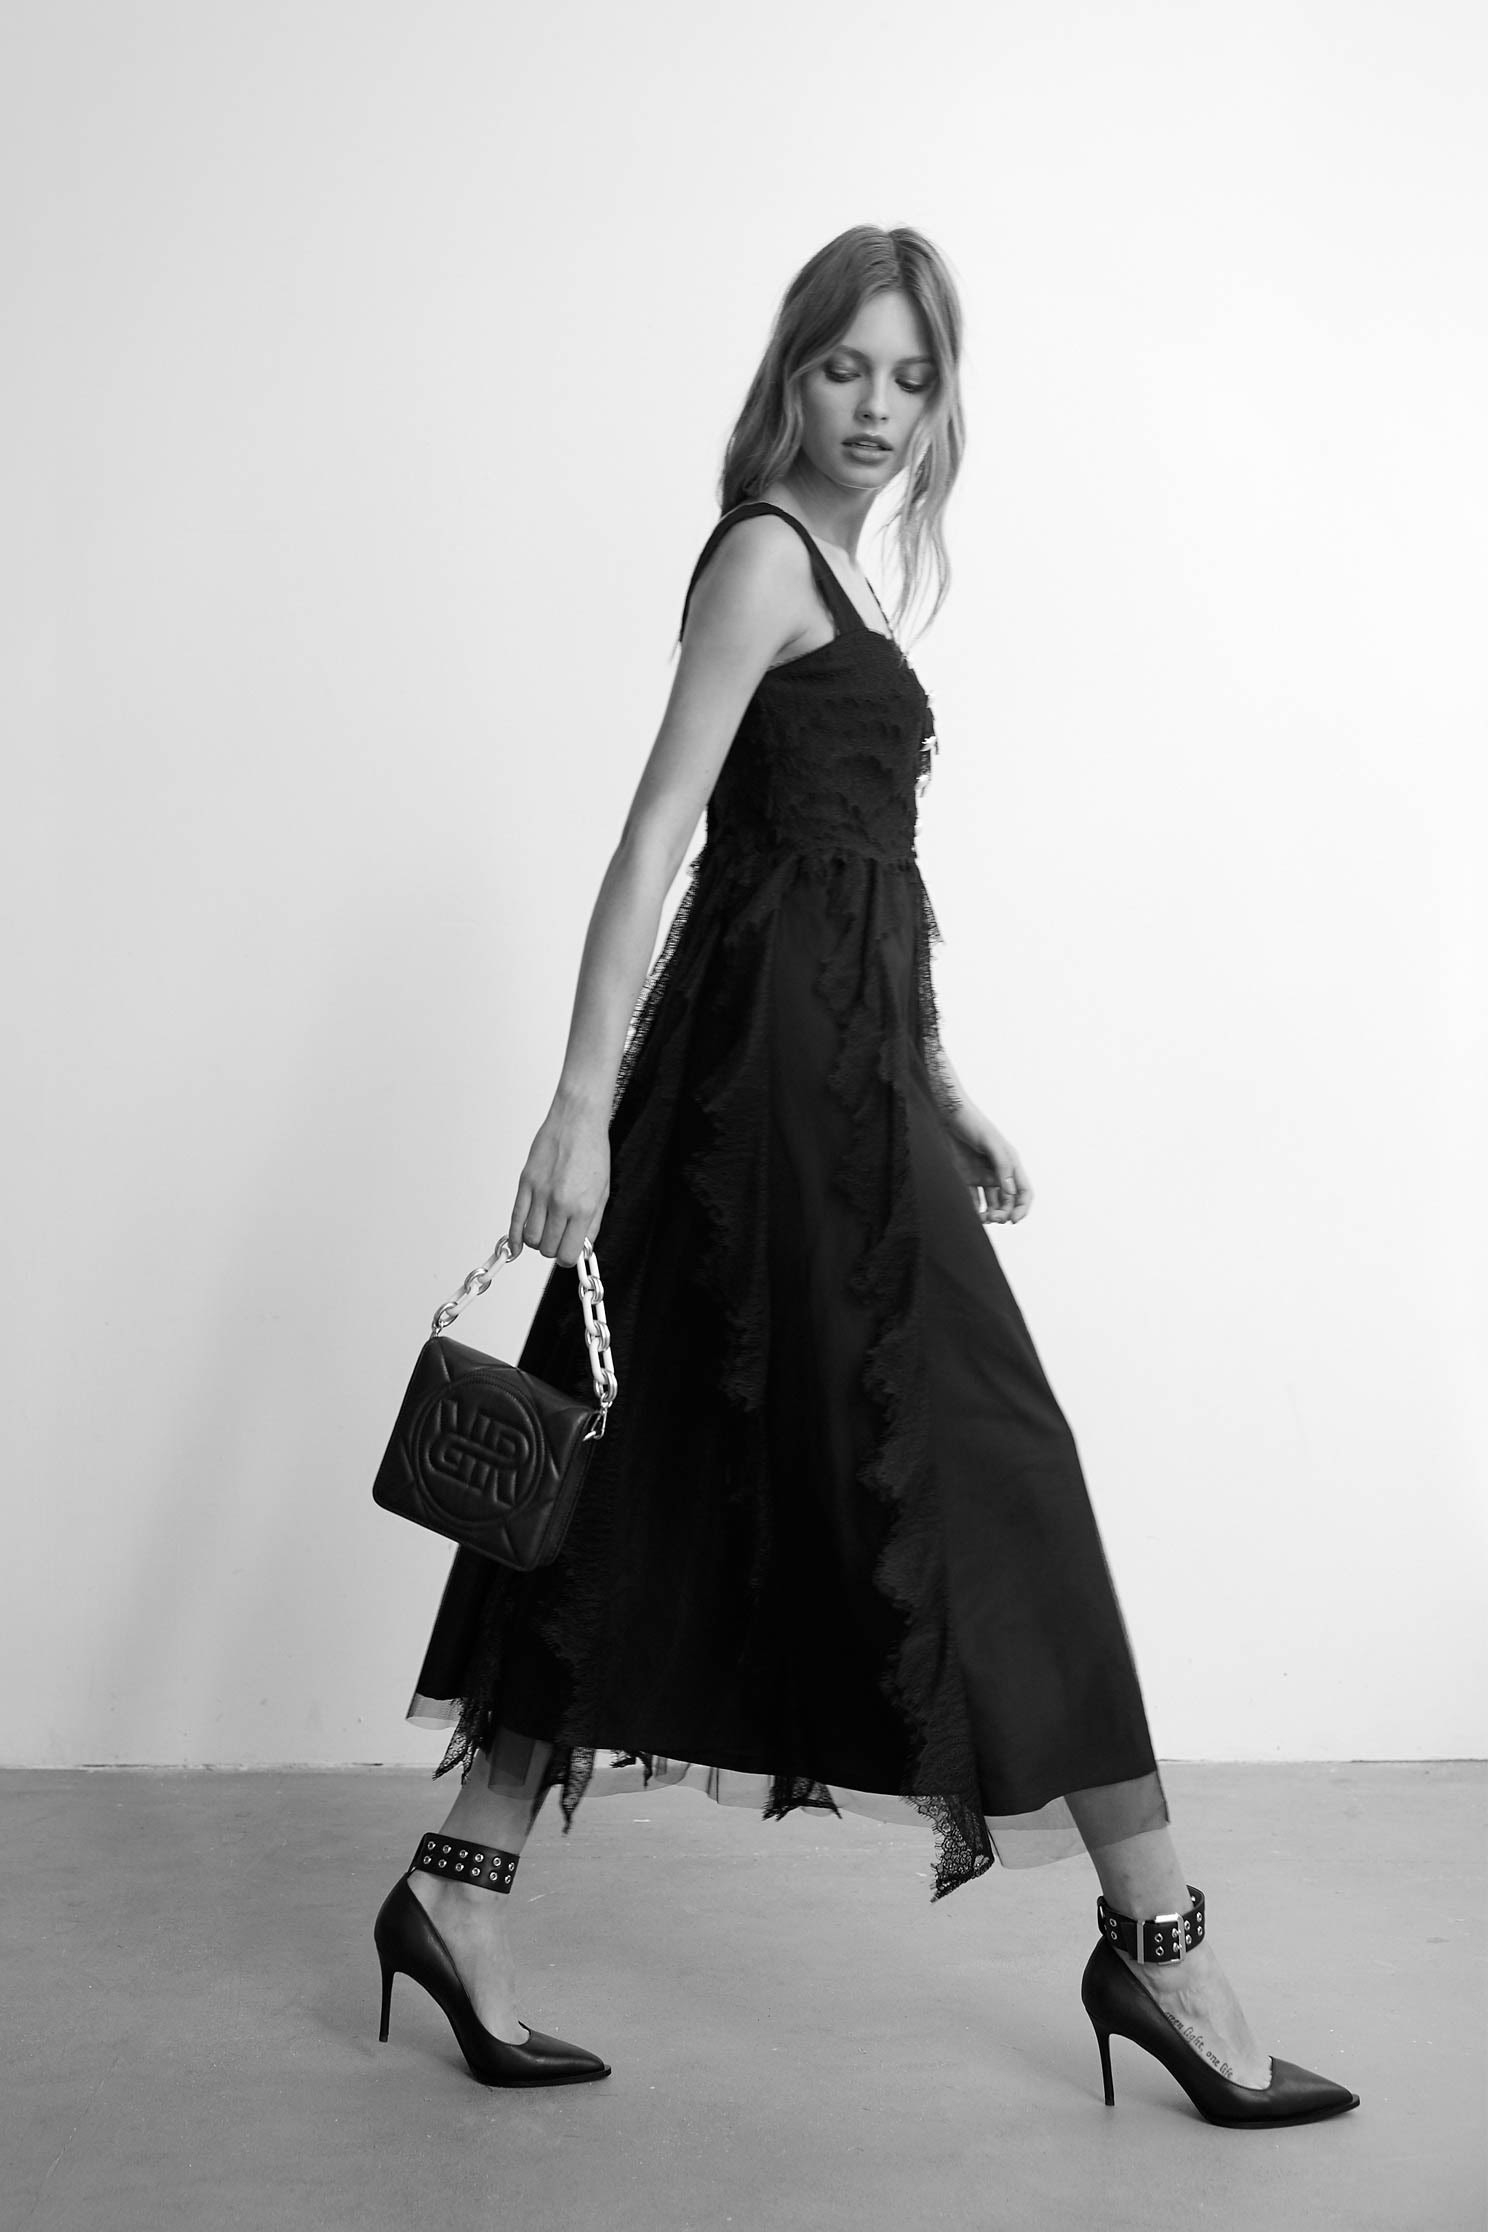 Loose-fitting long dress with strappy lace,Dresses,cocktaildresses,Sleeveless dresses,Evening dresses,Season (AW) Look,Lace,Lace dresses,Black dresses